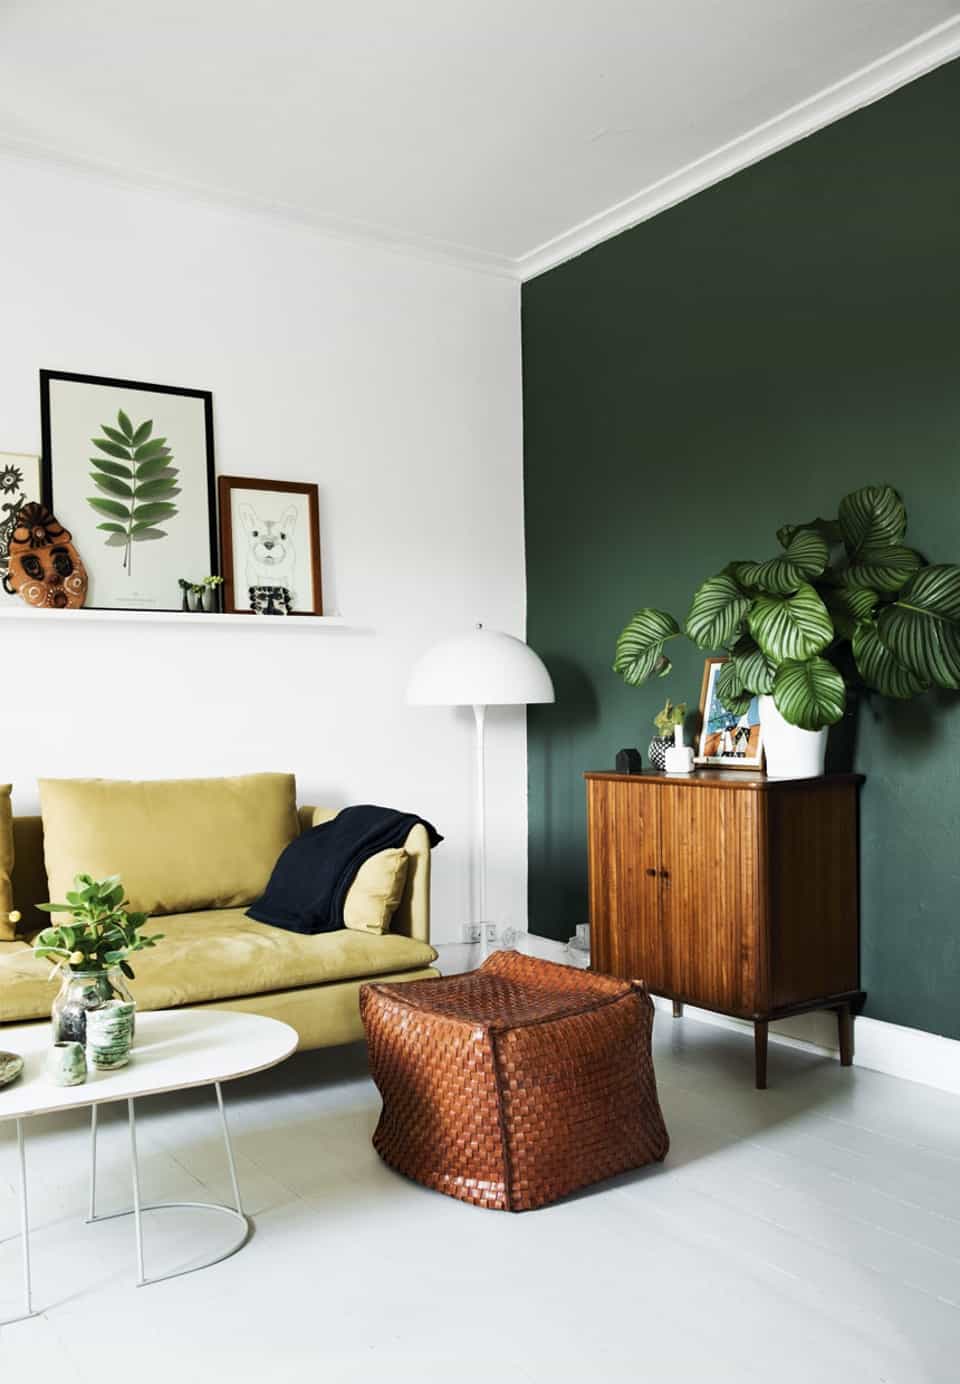 Retro chic apartment with a green color theme